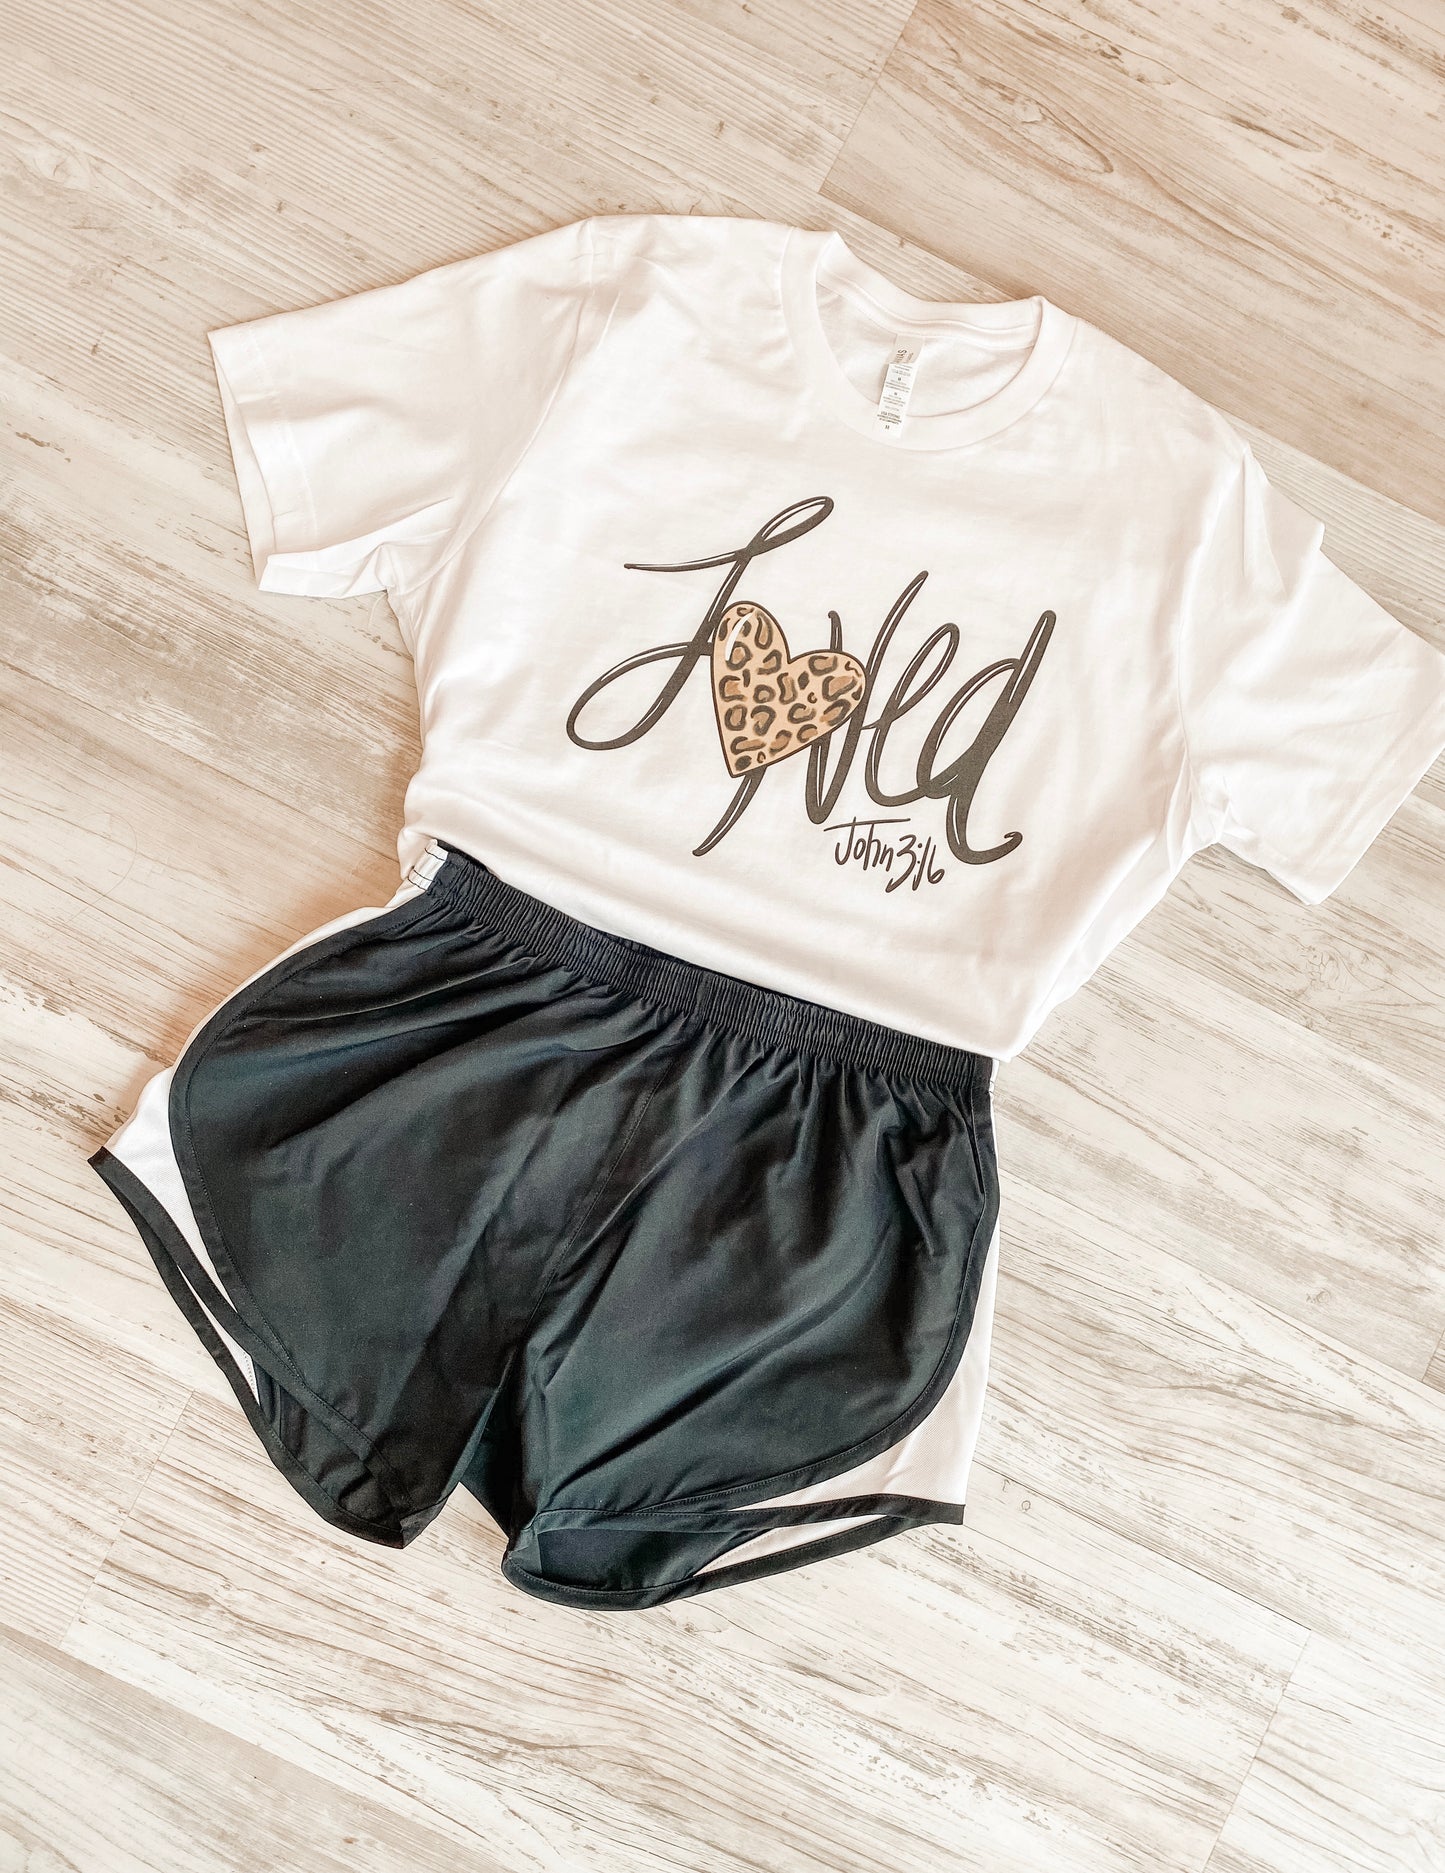 Loved Top with Athletic Shorts (White Tee/Black Shorts) - Southern Grace Creations